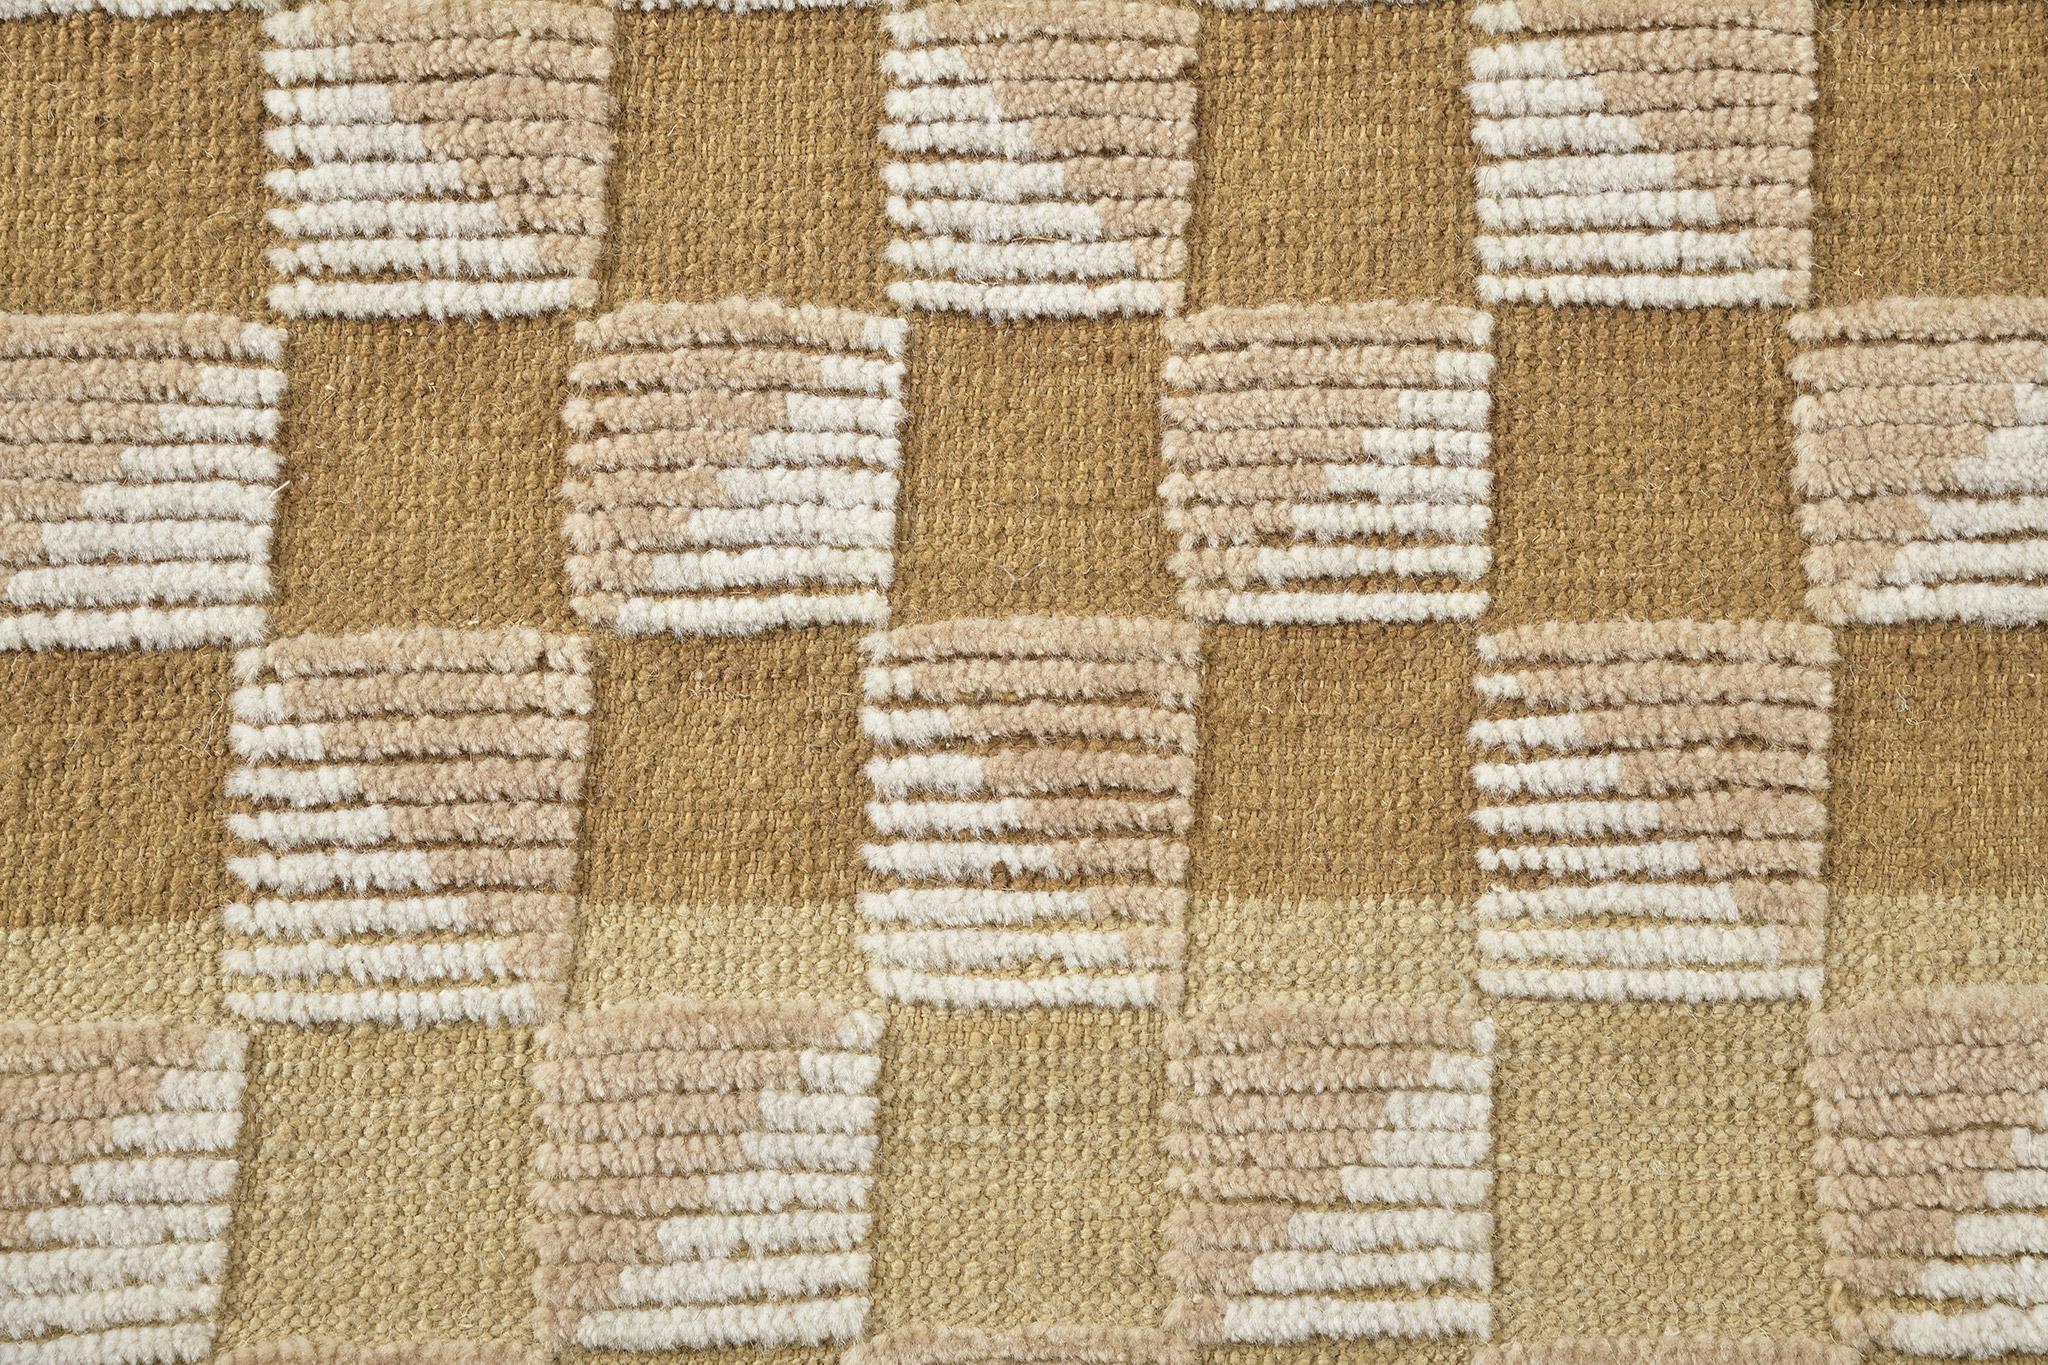 Revealing the panel design geometric motifs, Franc’ in Estancia Collection boasts its character and style. This captivating rug features stunning earthy toned shades in ivory, gold and khaki. This rug creates an impressive pattern perfect to be